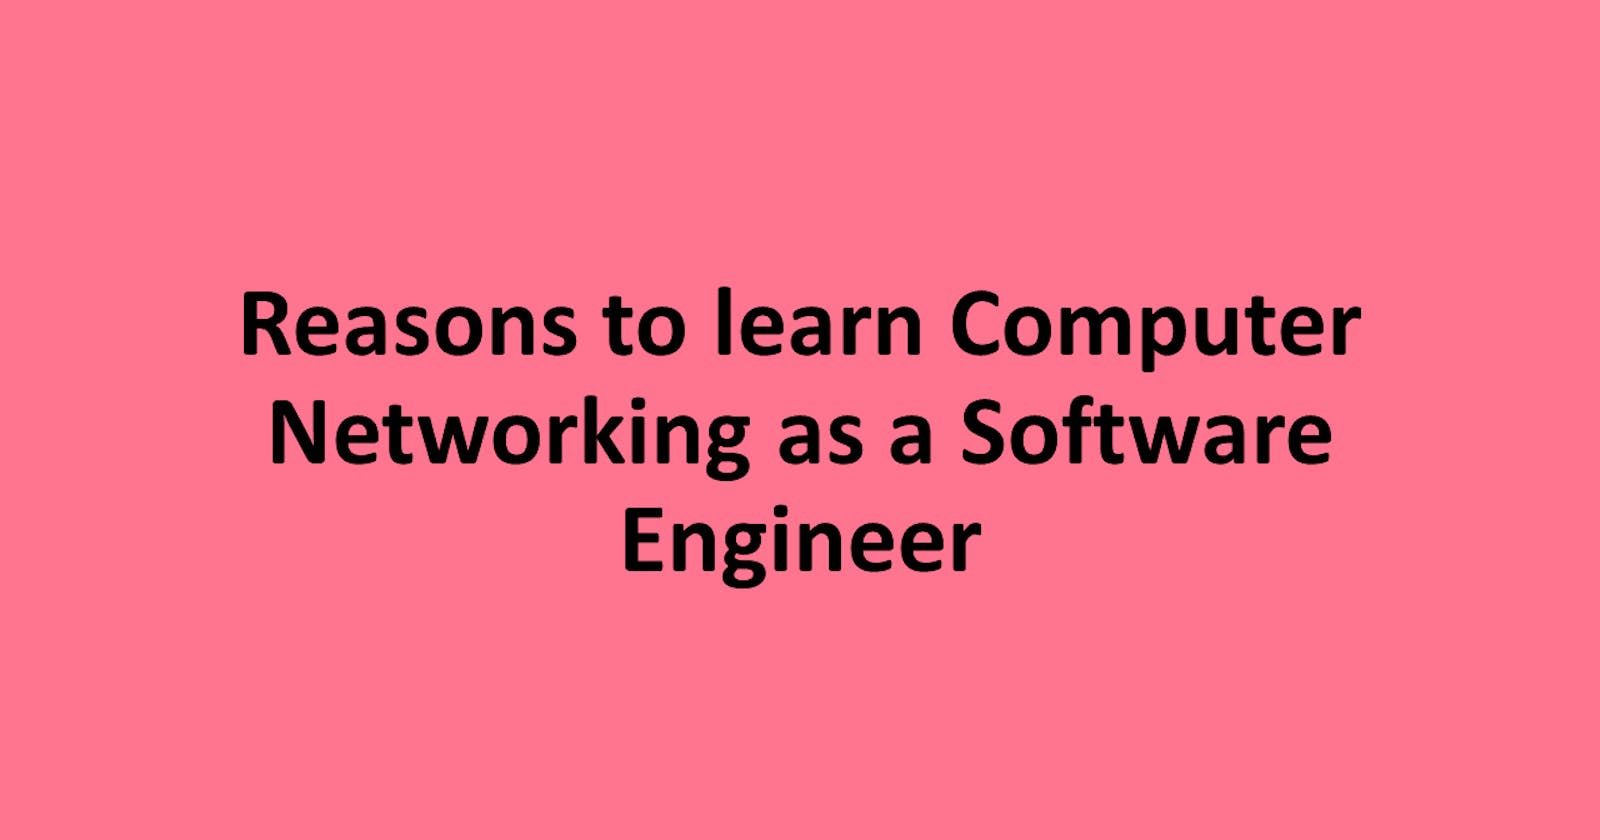 Reasons to learn Computer Networking as a Software Engineer